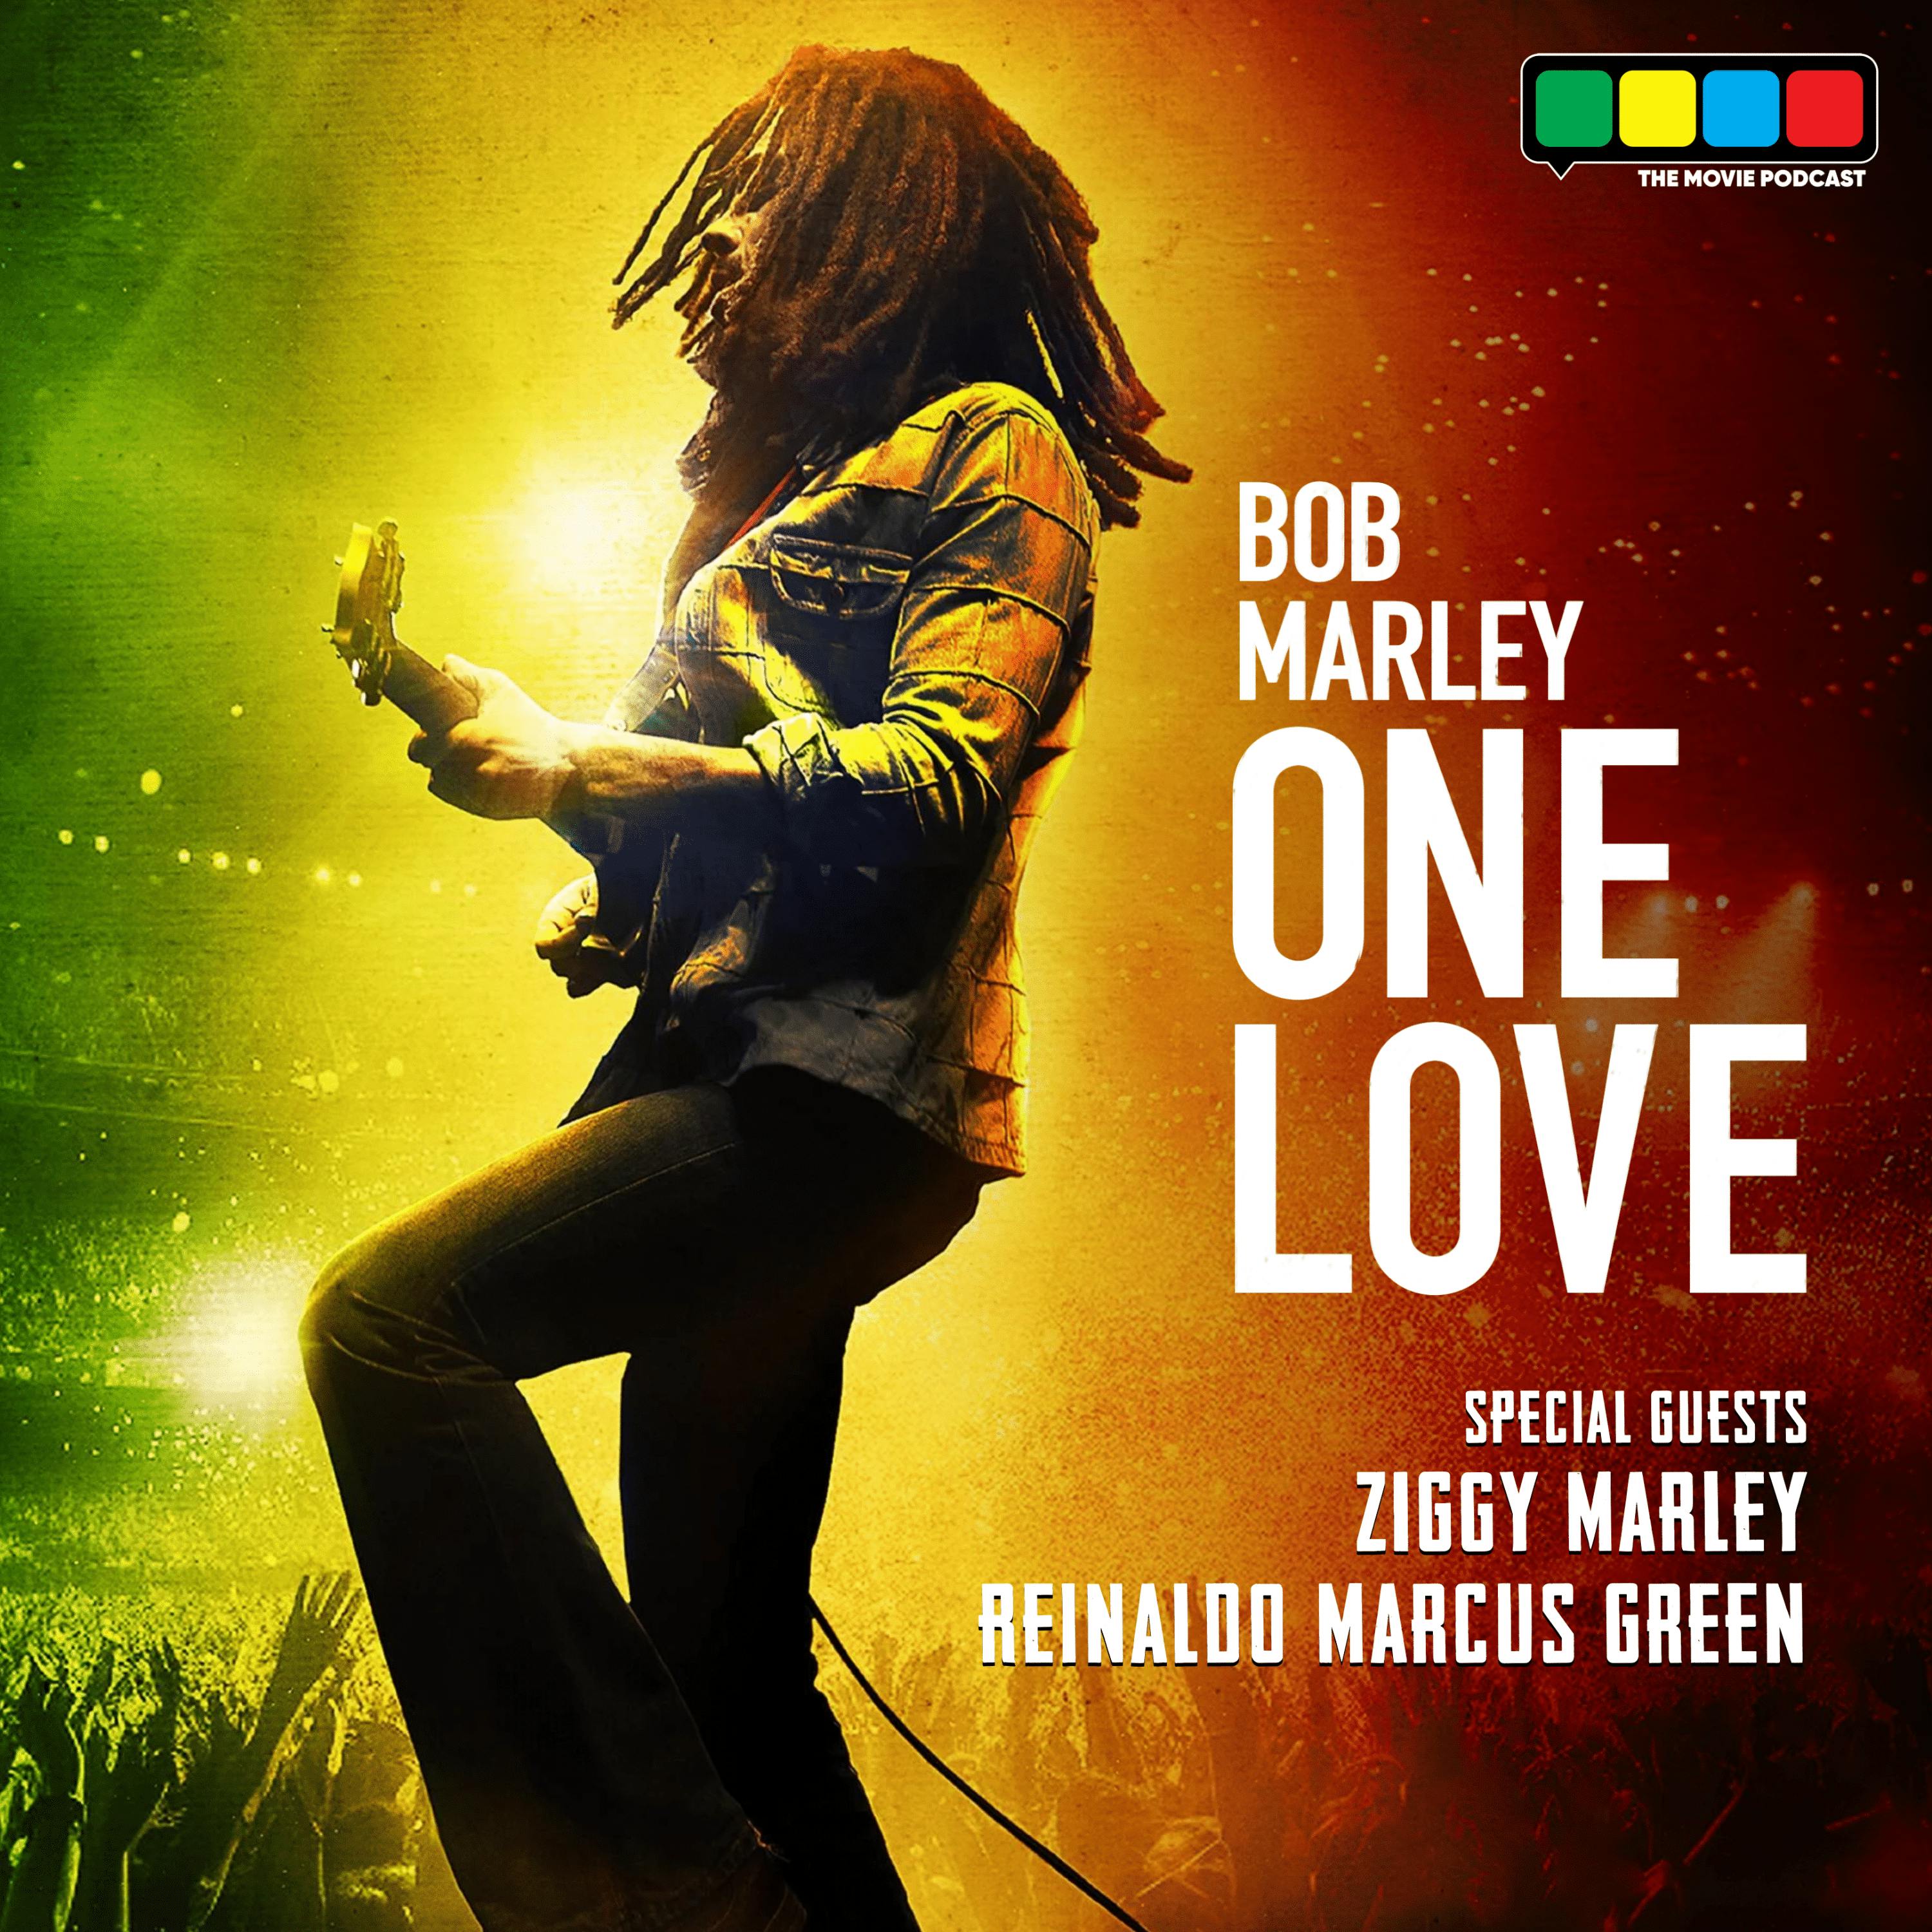 Interview with Ziggy Marley and Director Reinaldo Marcus Green of Bob Marley: One Love Movie